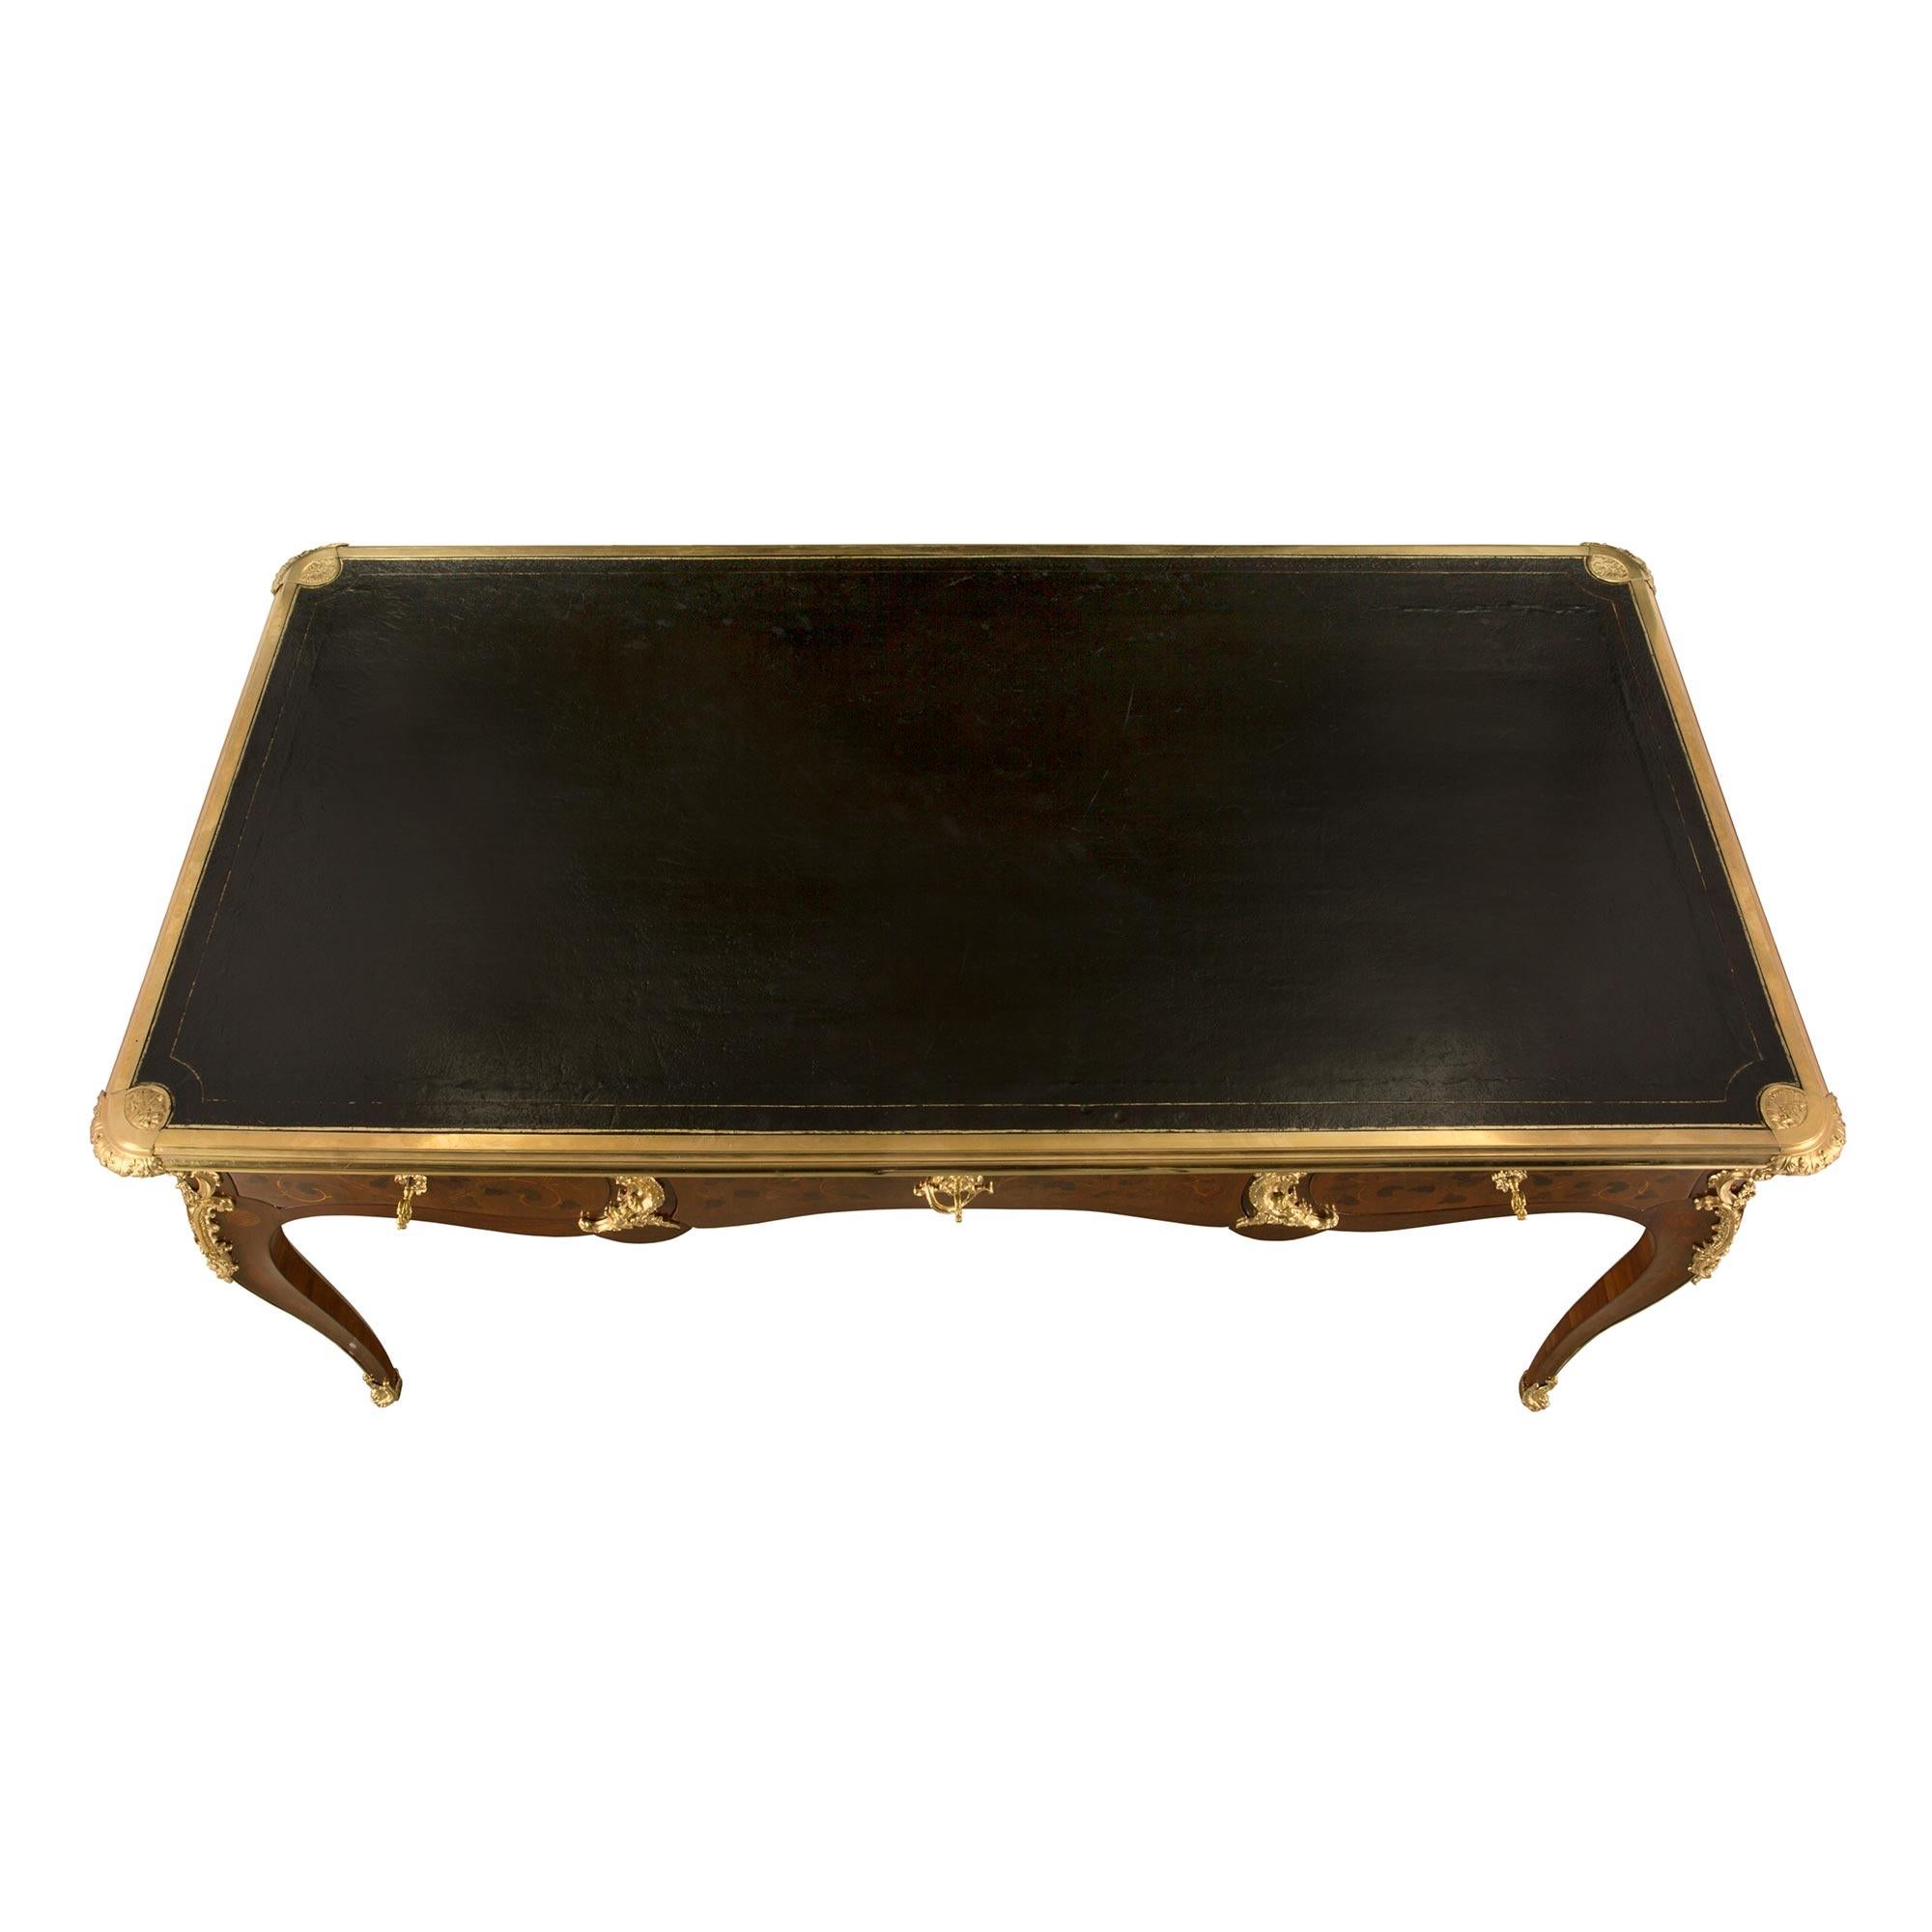 A most elegant French 19th century Louis XV st. kingwood and ormolu desk. The desk is raised by beautiful cabriole legs with fine wrap around ormolu sabots and a striking ormolu fillet which leads up each leg to richly chased pierced foliate corner